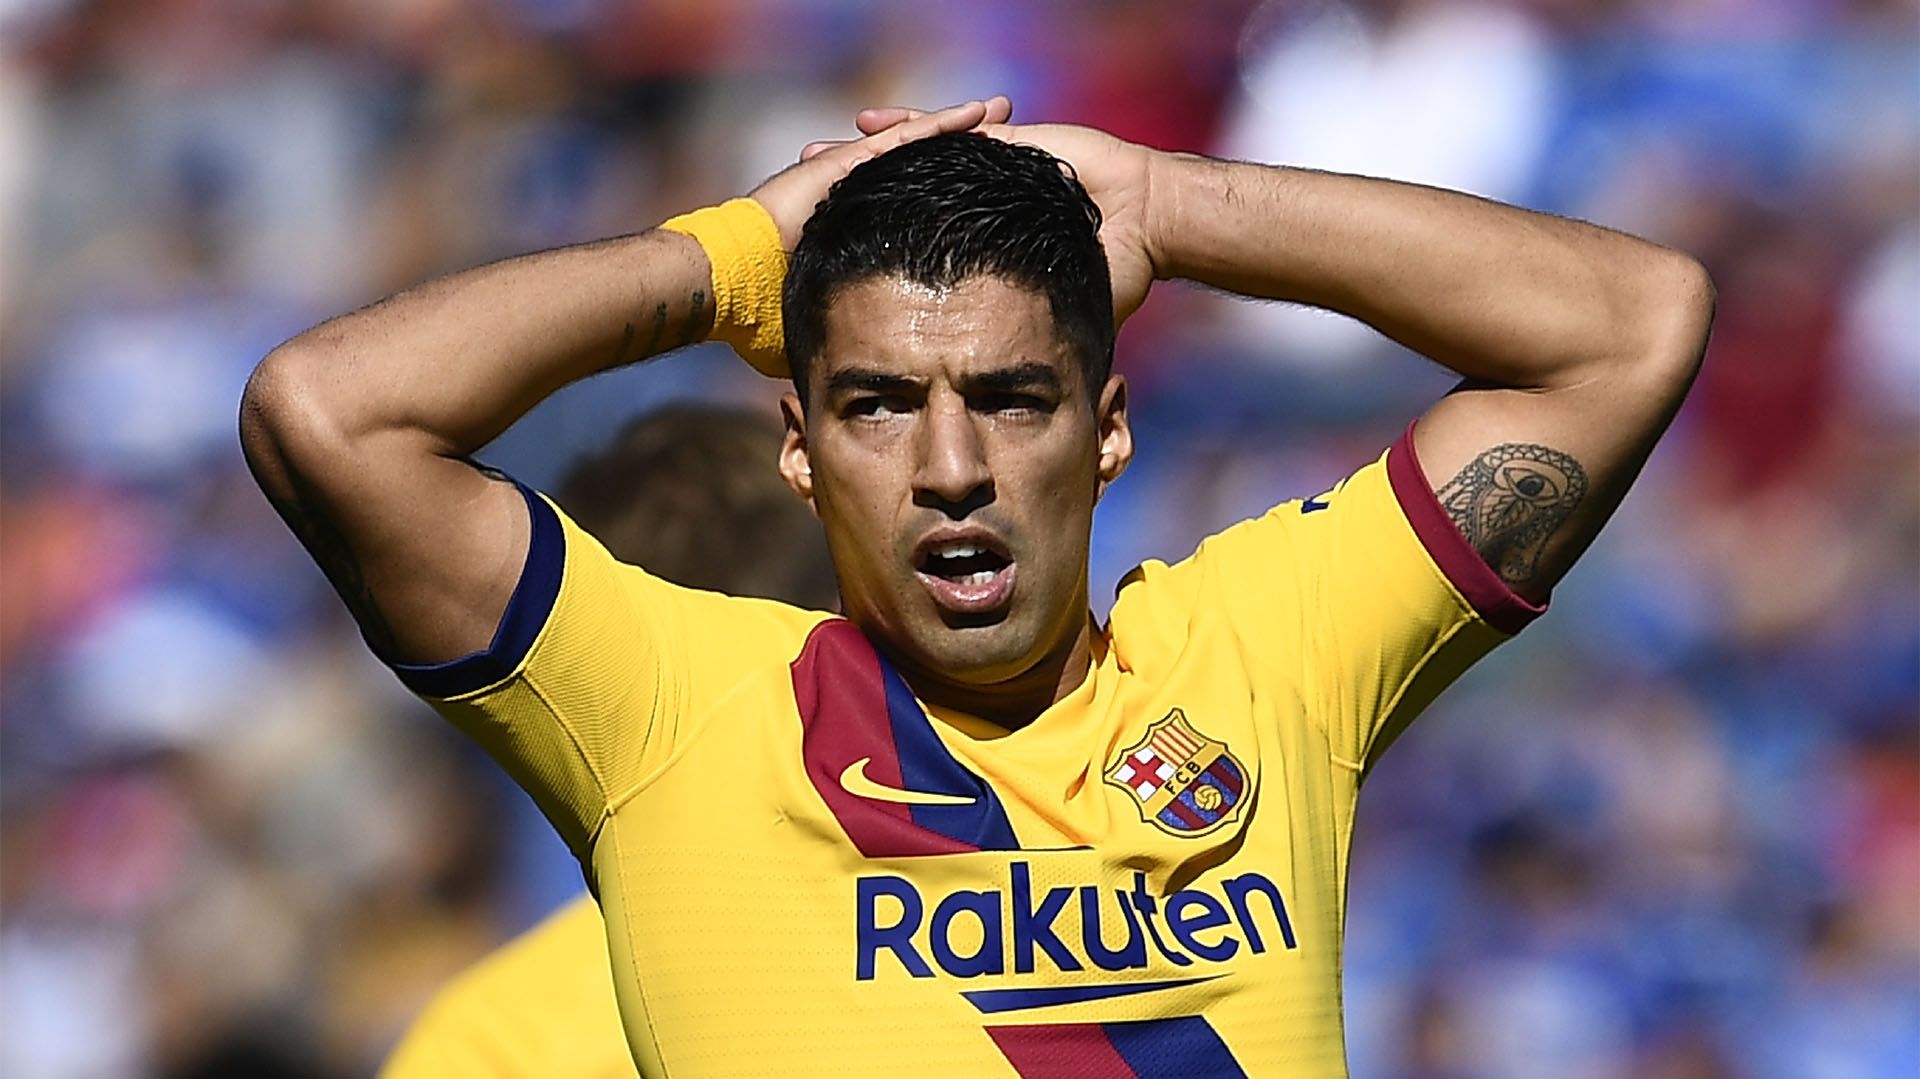 Barcelona's Uruguayan forward Luis Suarez reacts after missing a goal opportunity during the Spanish league football match between Getafe CF and FC Barcelona at the Col. Alfonso Perez stadium in Getafe on September 28, 2019. (Photo by OSCAR DEL POZO / AFP)